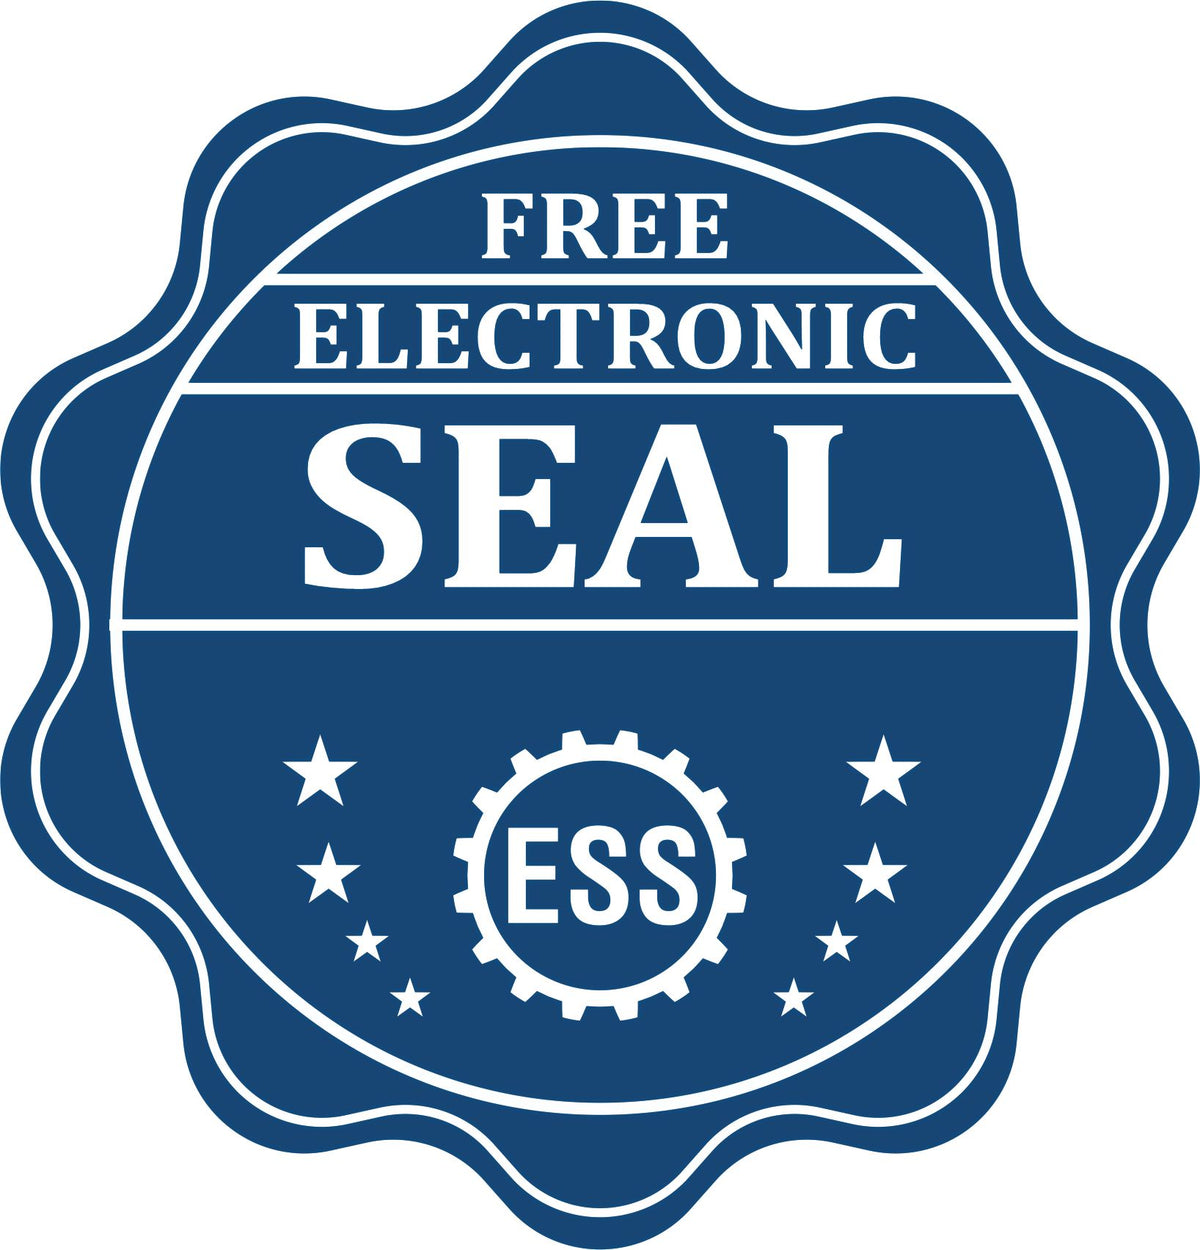 A badge showing a free electronic seal for the Gift South Dakota Land Surveyor Seal with stars and the ESS gear on the emblem.